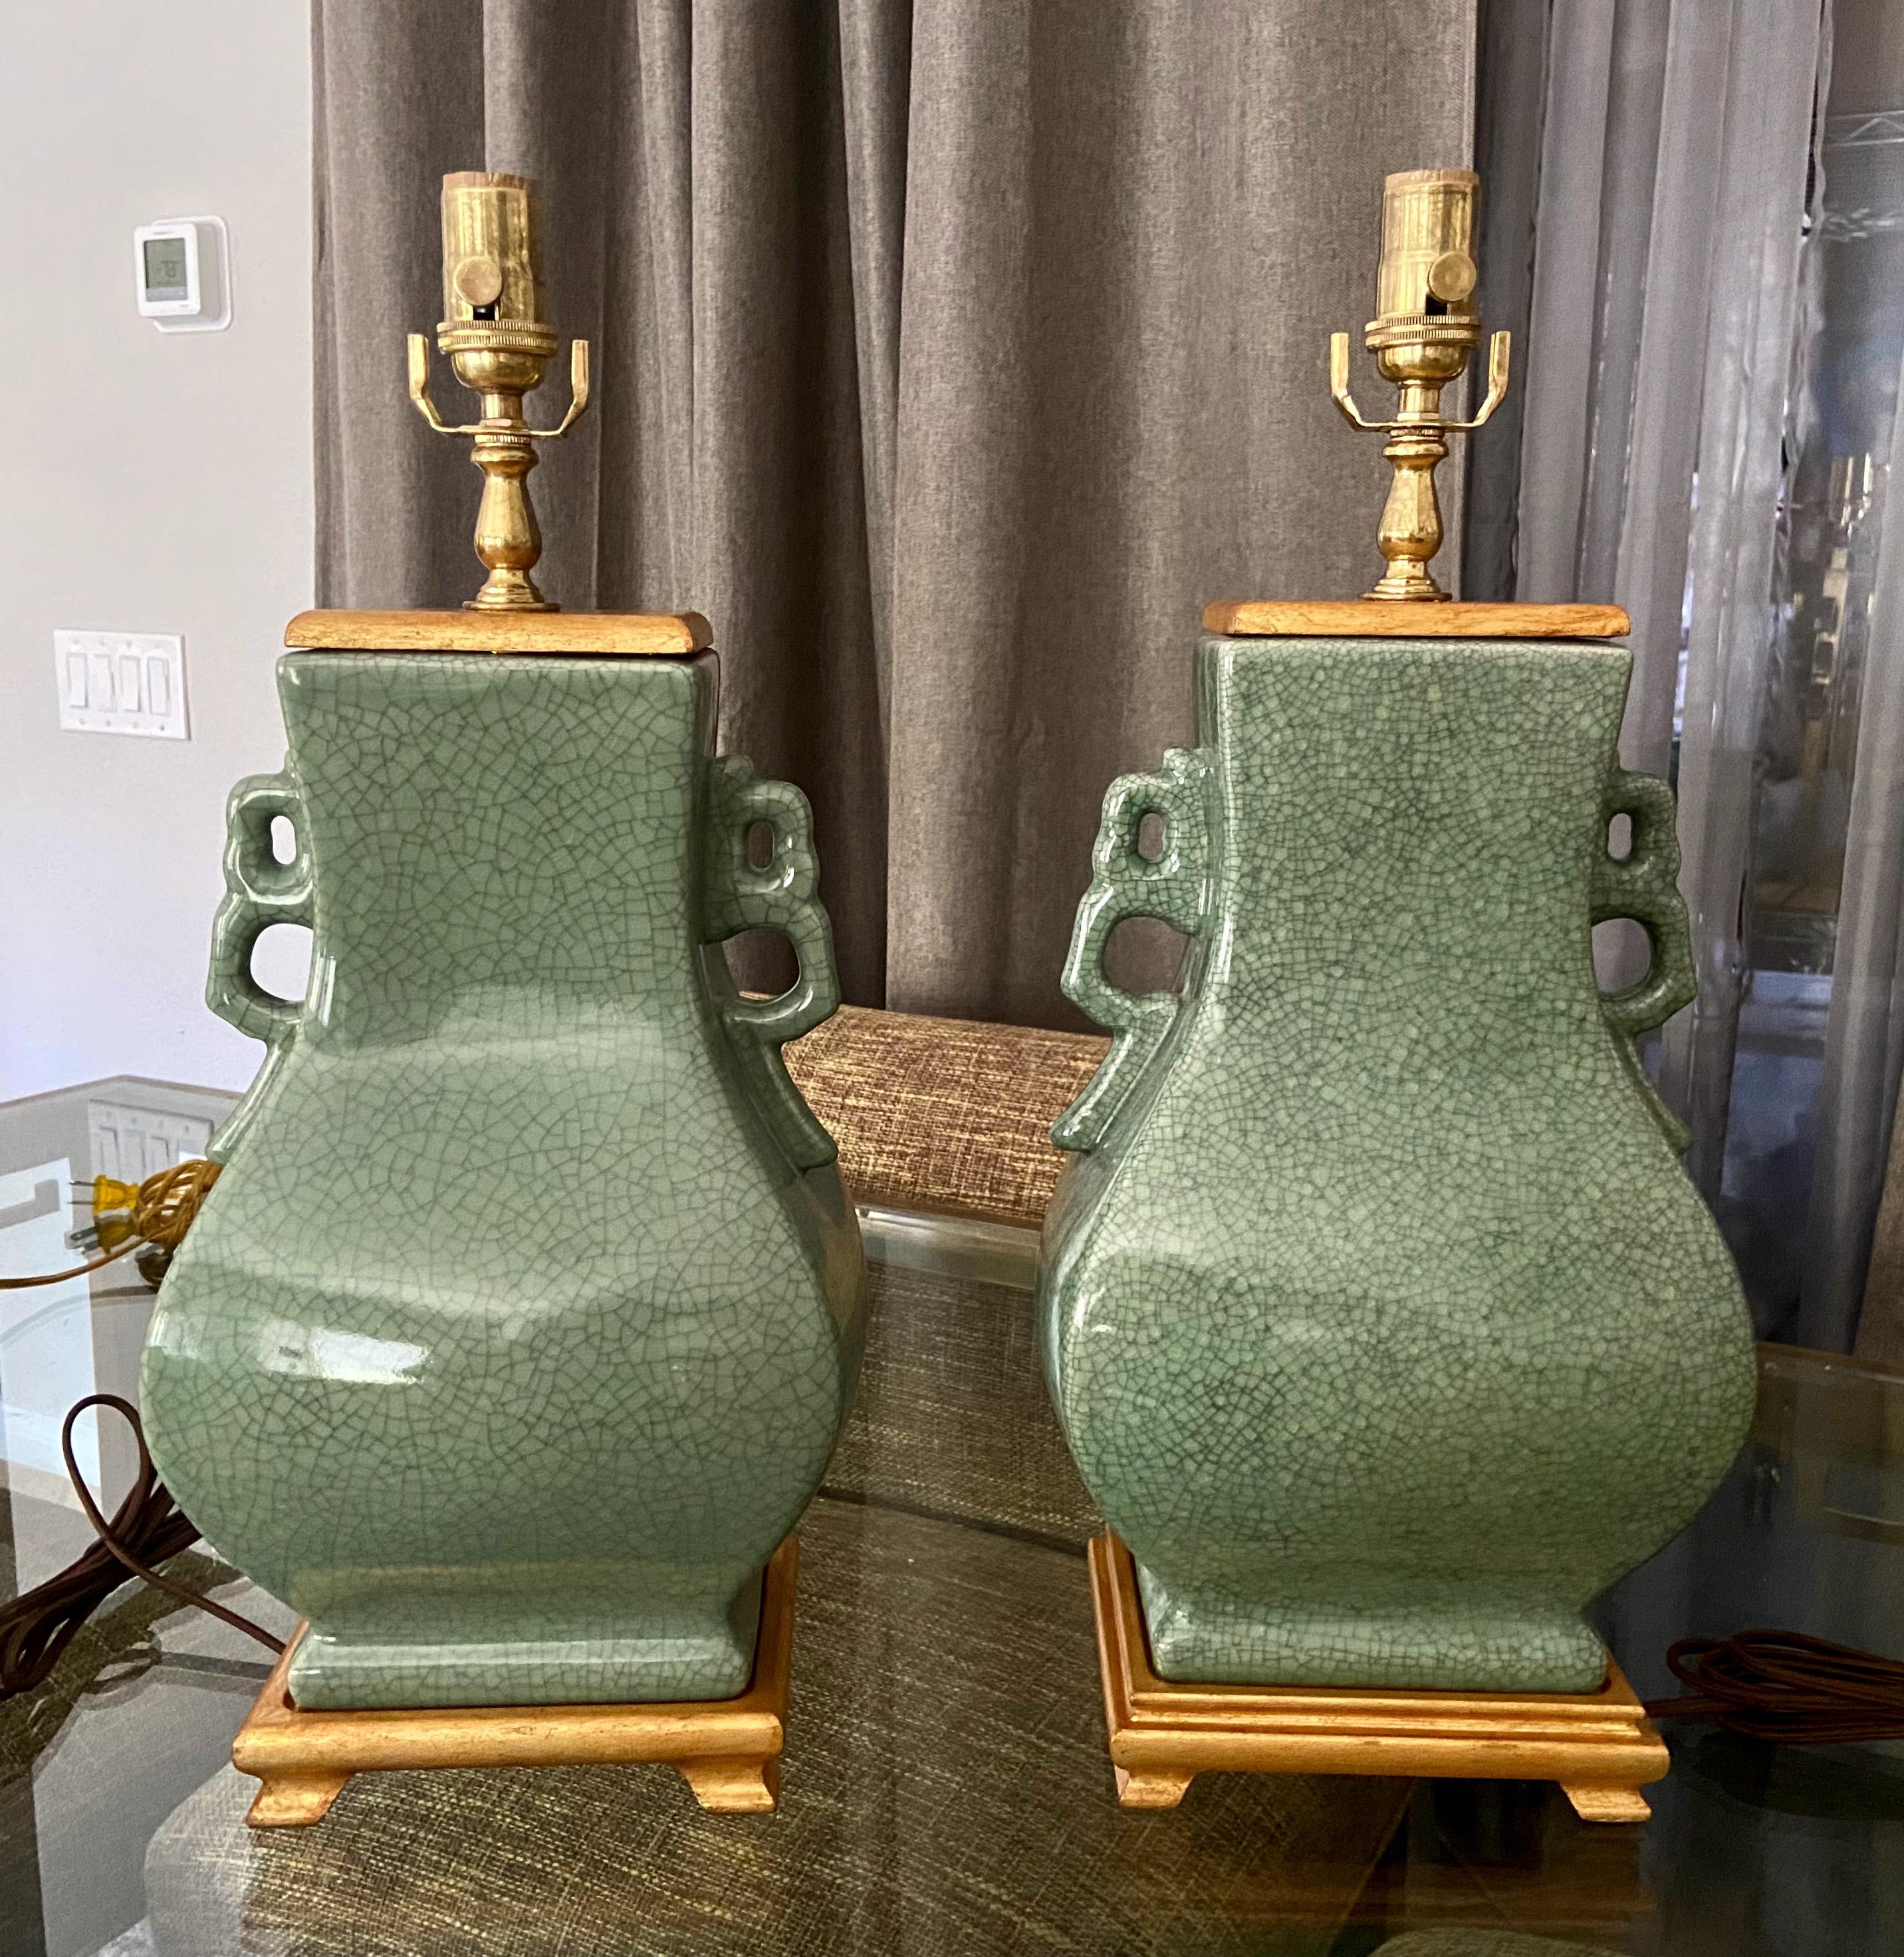 Pair of Chinese Asian celadon green crackle glaze porcelain table lamps with handles. Each mounted on giltwood bases along with matching vase cap. Newly wired with new 3 way brass sockets and rayon cords. The rectangular shape measures 22